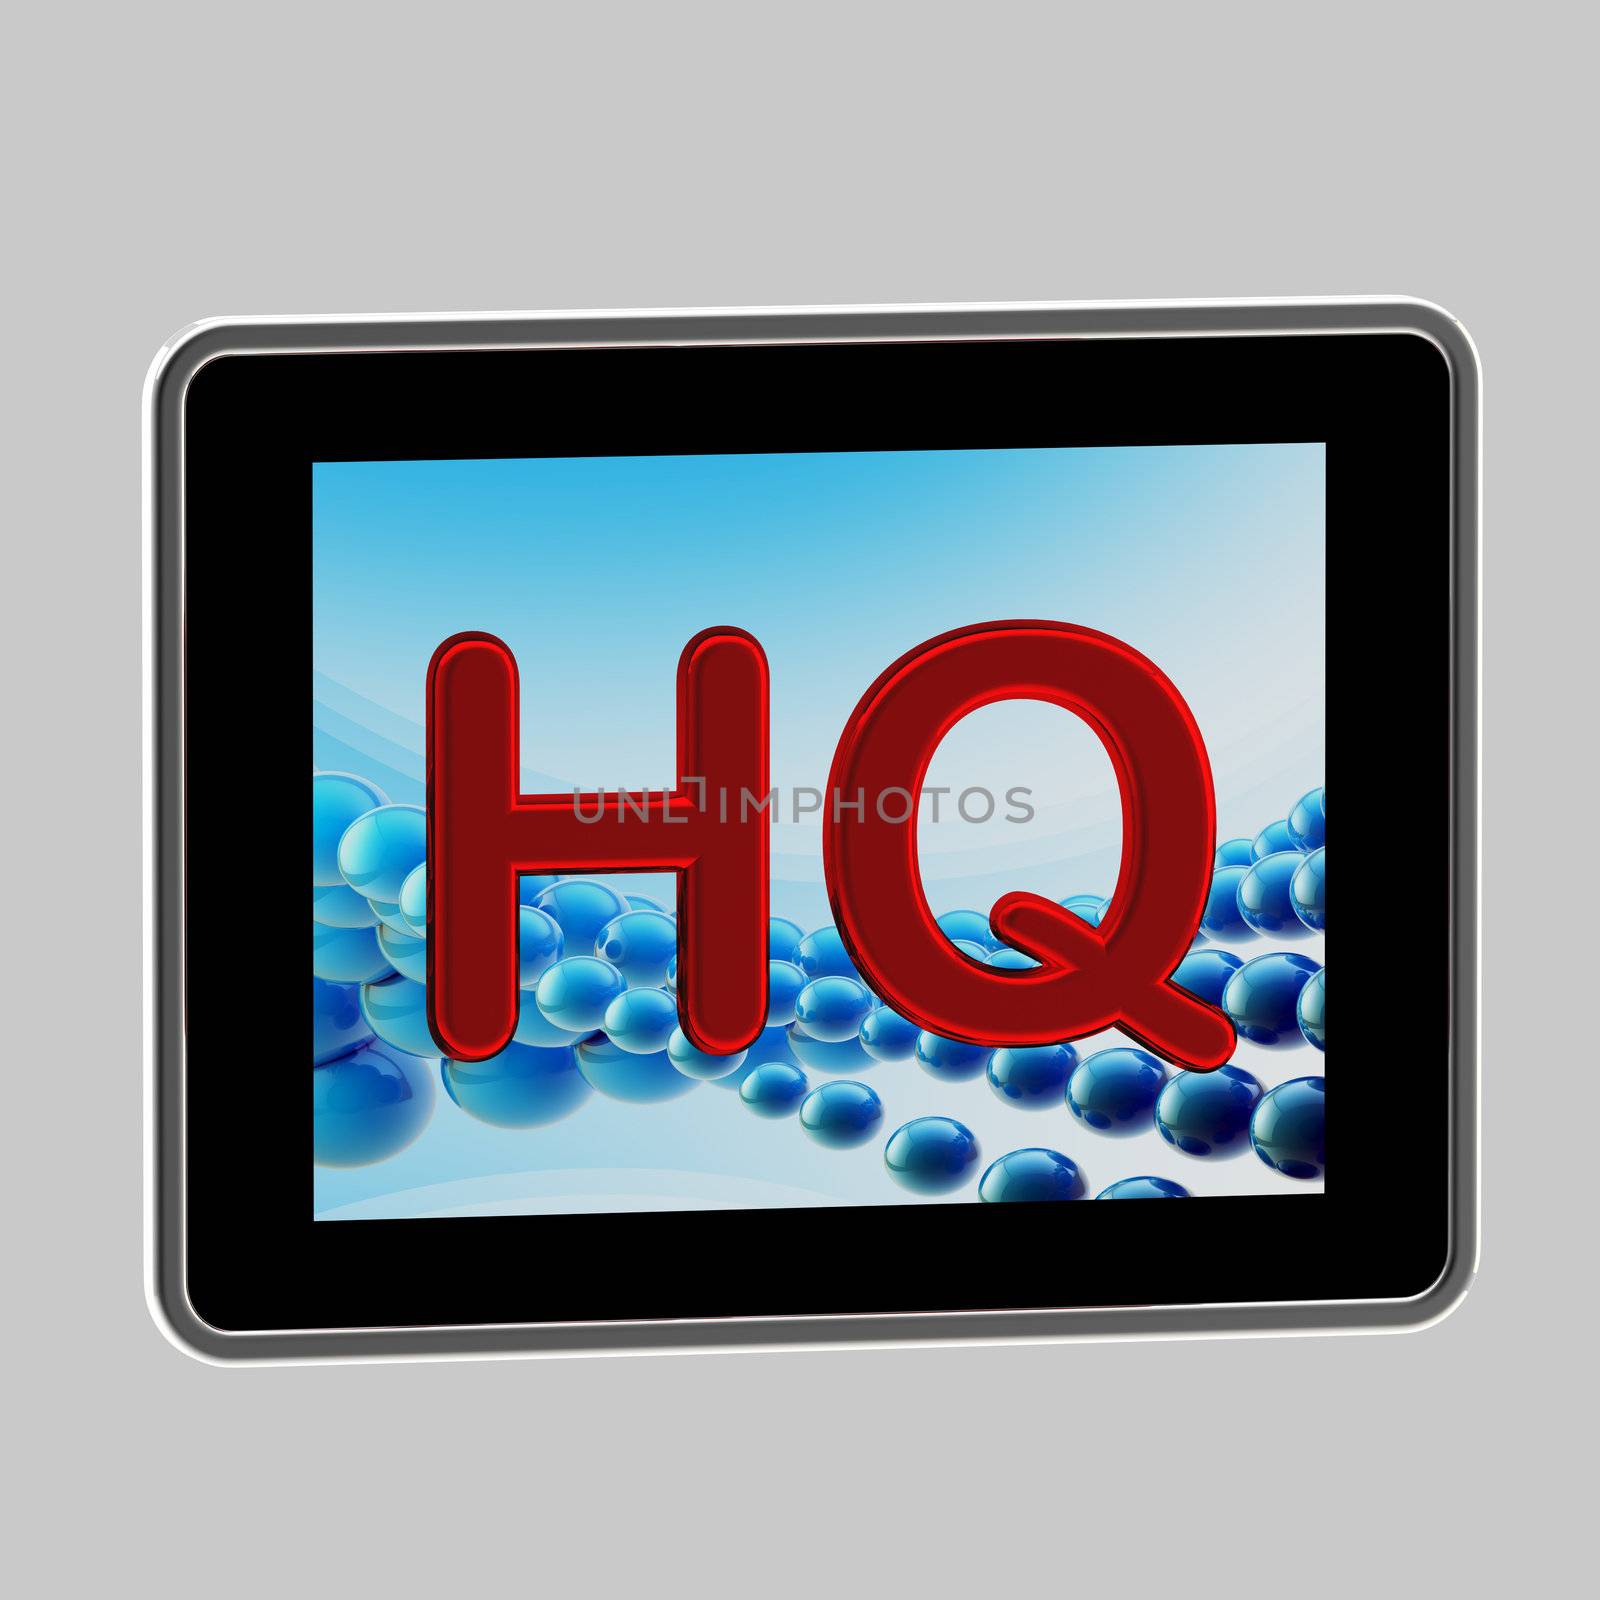 HQ high quality icon as a computer pad screen isolated on grey